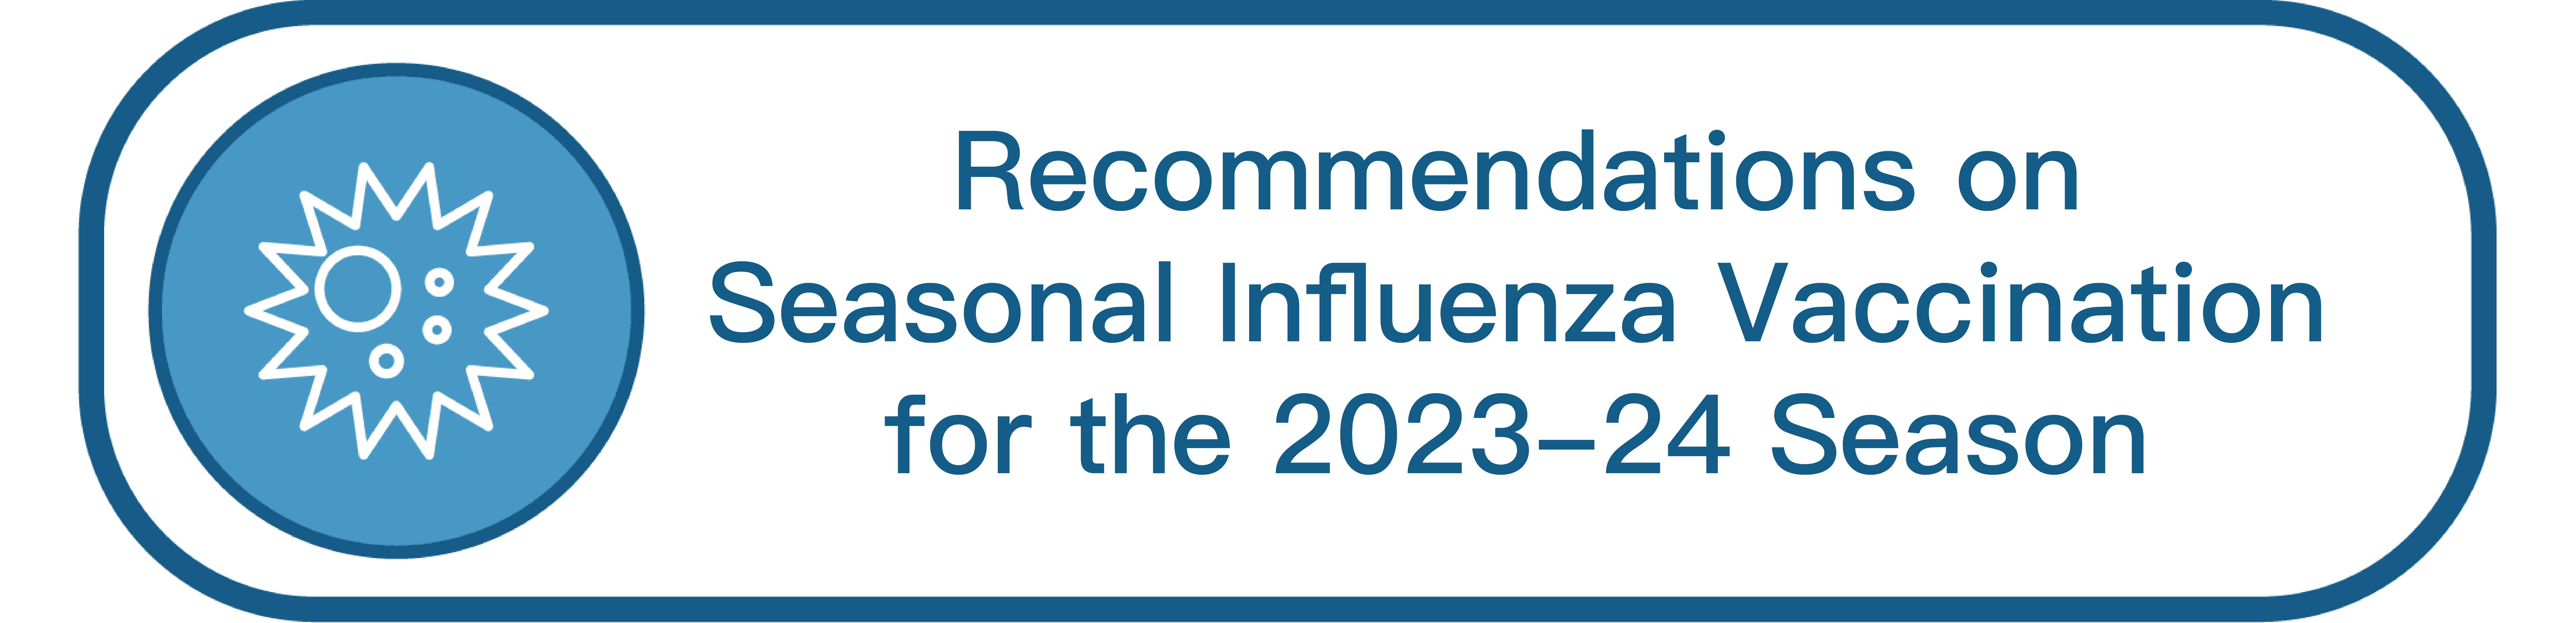 Recommendations on Seasonal Influenza Vaccination for the 2023/24 Season